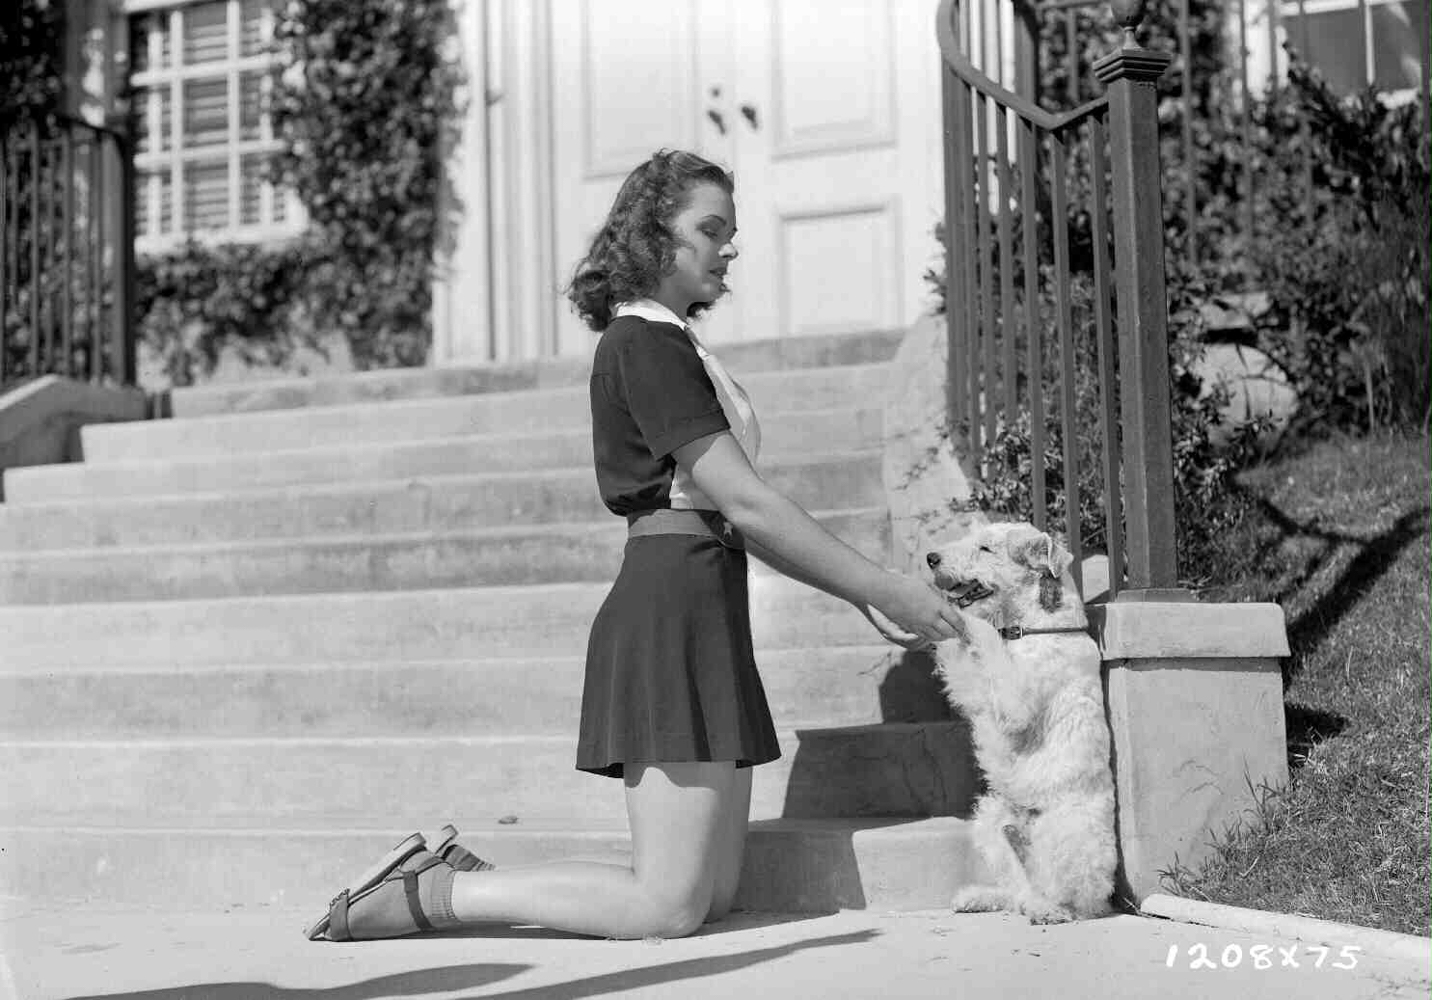 Shadow of The Thin Man Publicity Stills ✻ Donna Reed with Asta ✻.